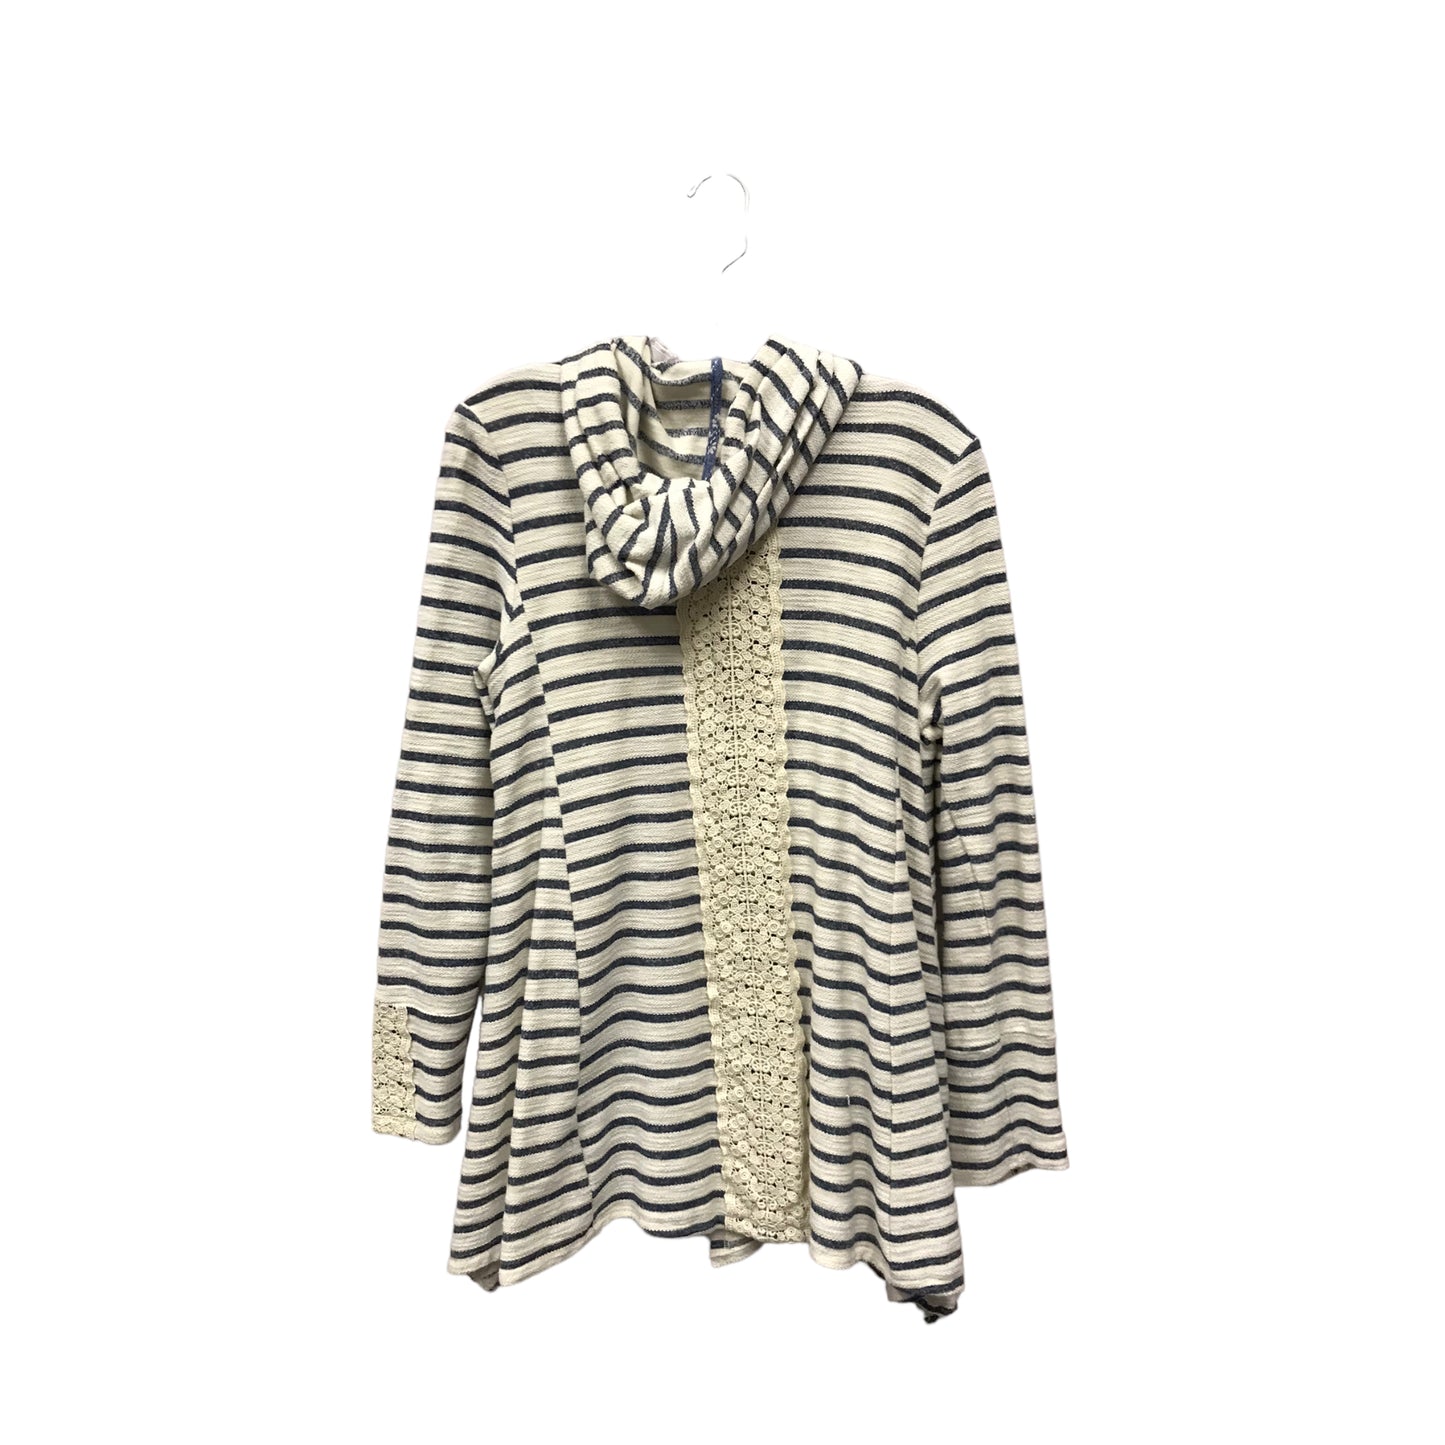 Sweater Cardigan By Saturday/sunday  Size: L